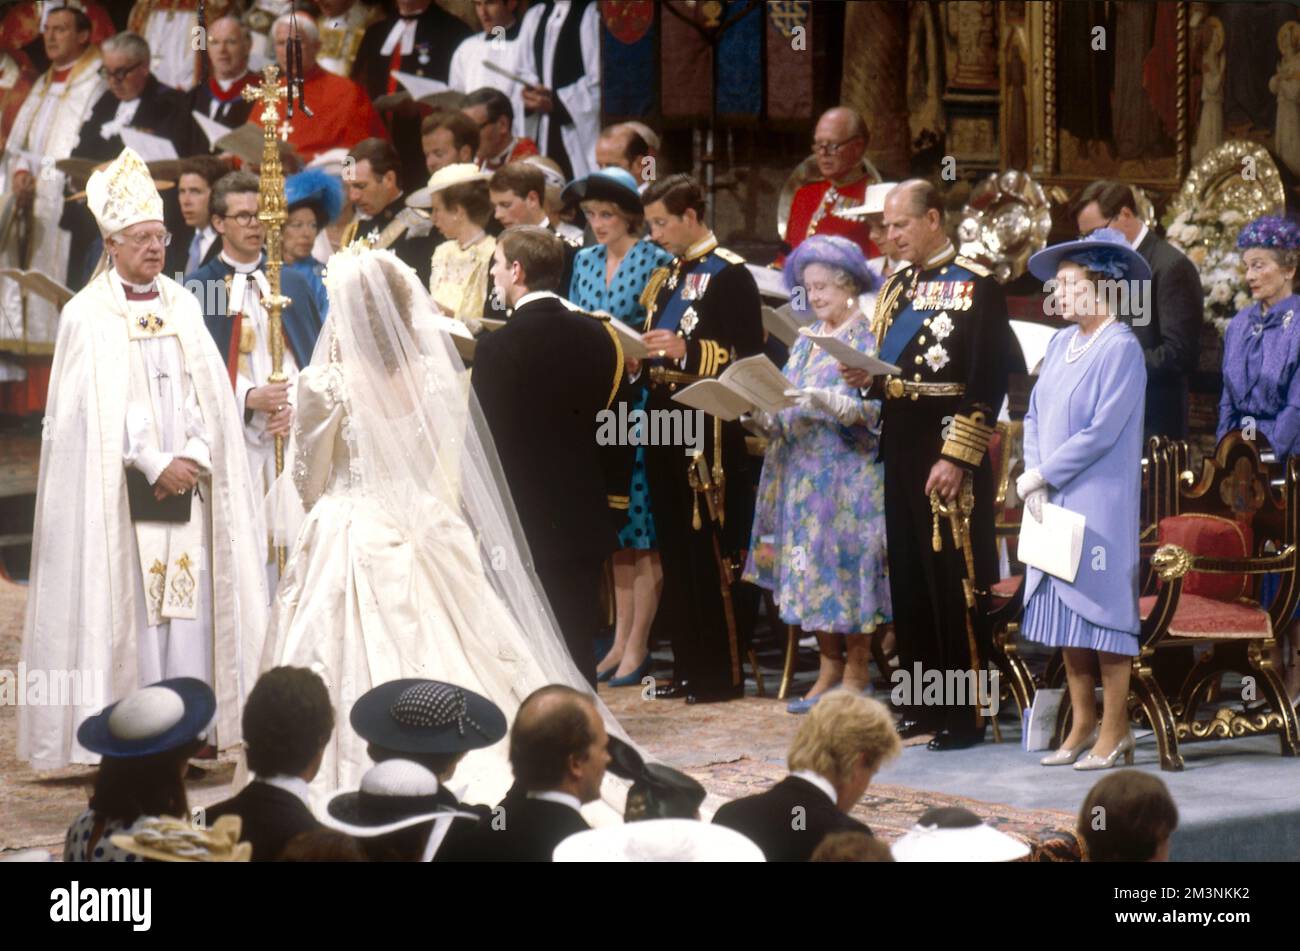 Witnessed by the royal family, Prince Andrew, Duke of York marries Sarah Ferguson at Westminster Abbey on 23 July 1986.  Archbishop of Canterbury, Robert Runcie officiates.  1986 Stock Photo